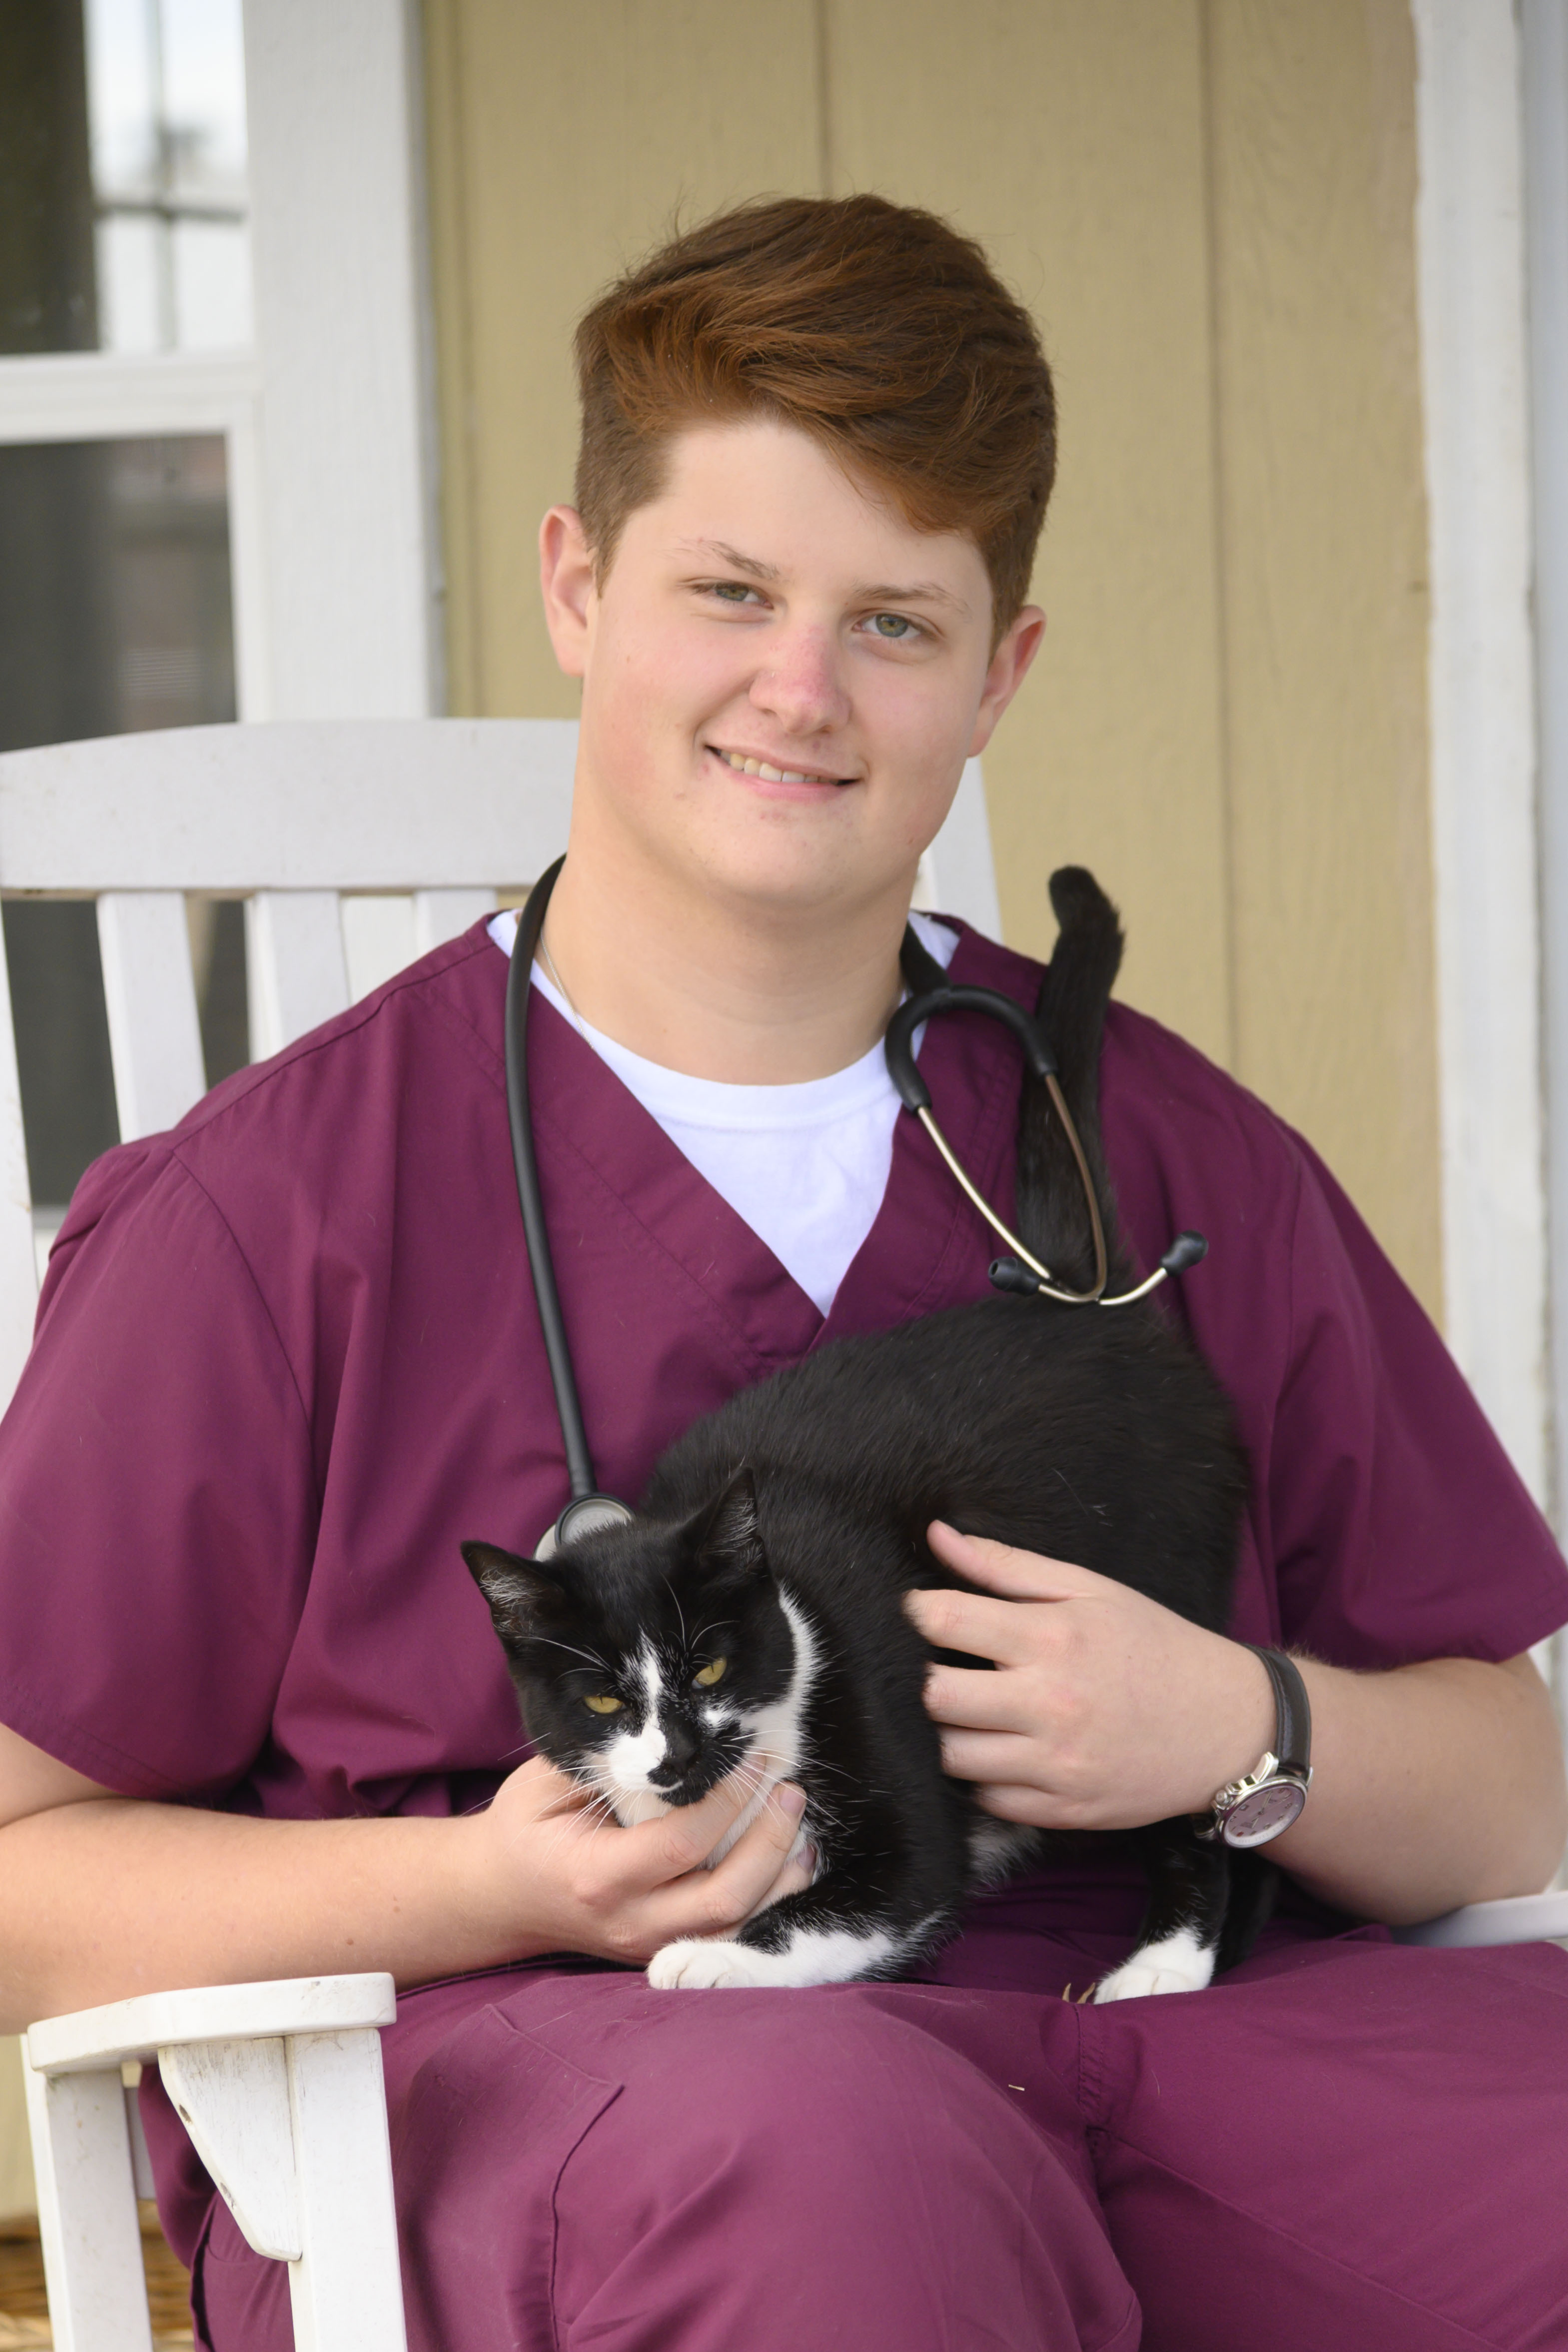 A veterinary student poses with a cat in a rocking chair